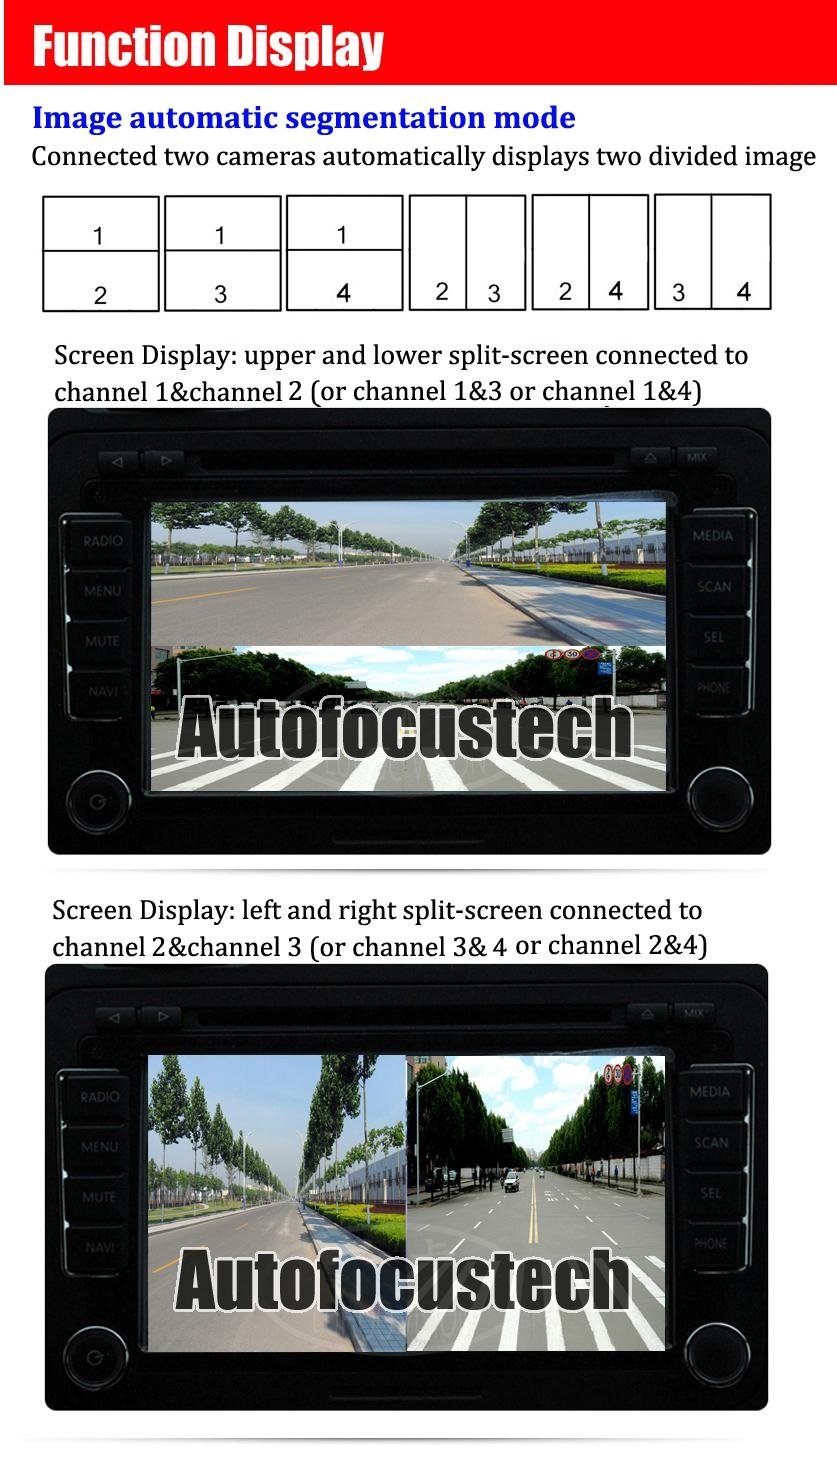 Full Parking View Front/Rear/Right/Left Cameras Image Quad Ways Video Monitoring 5